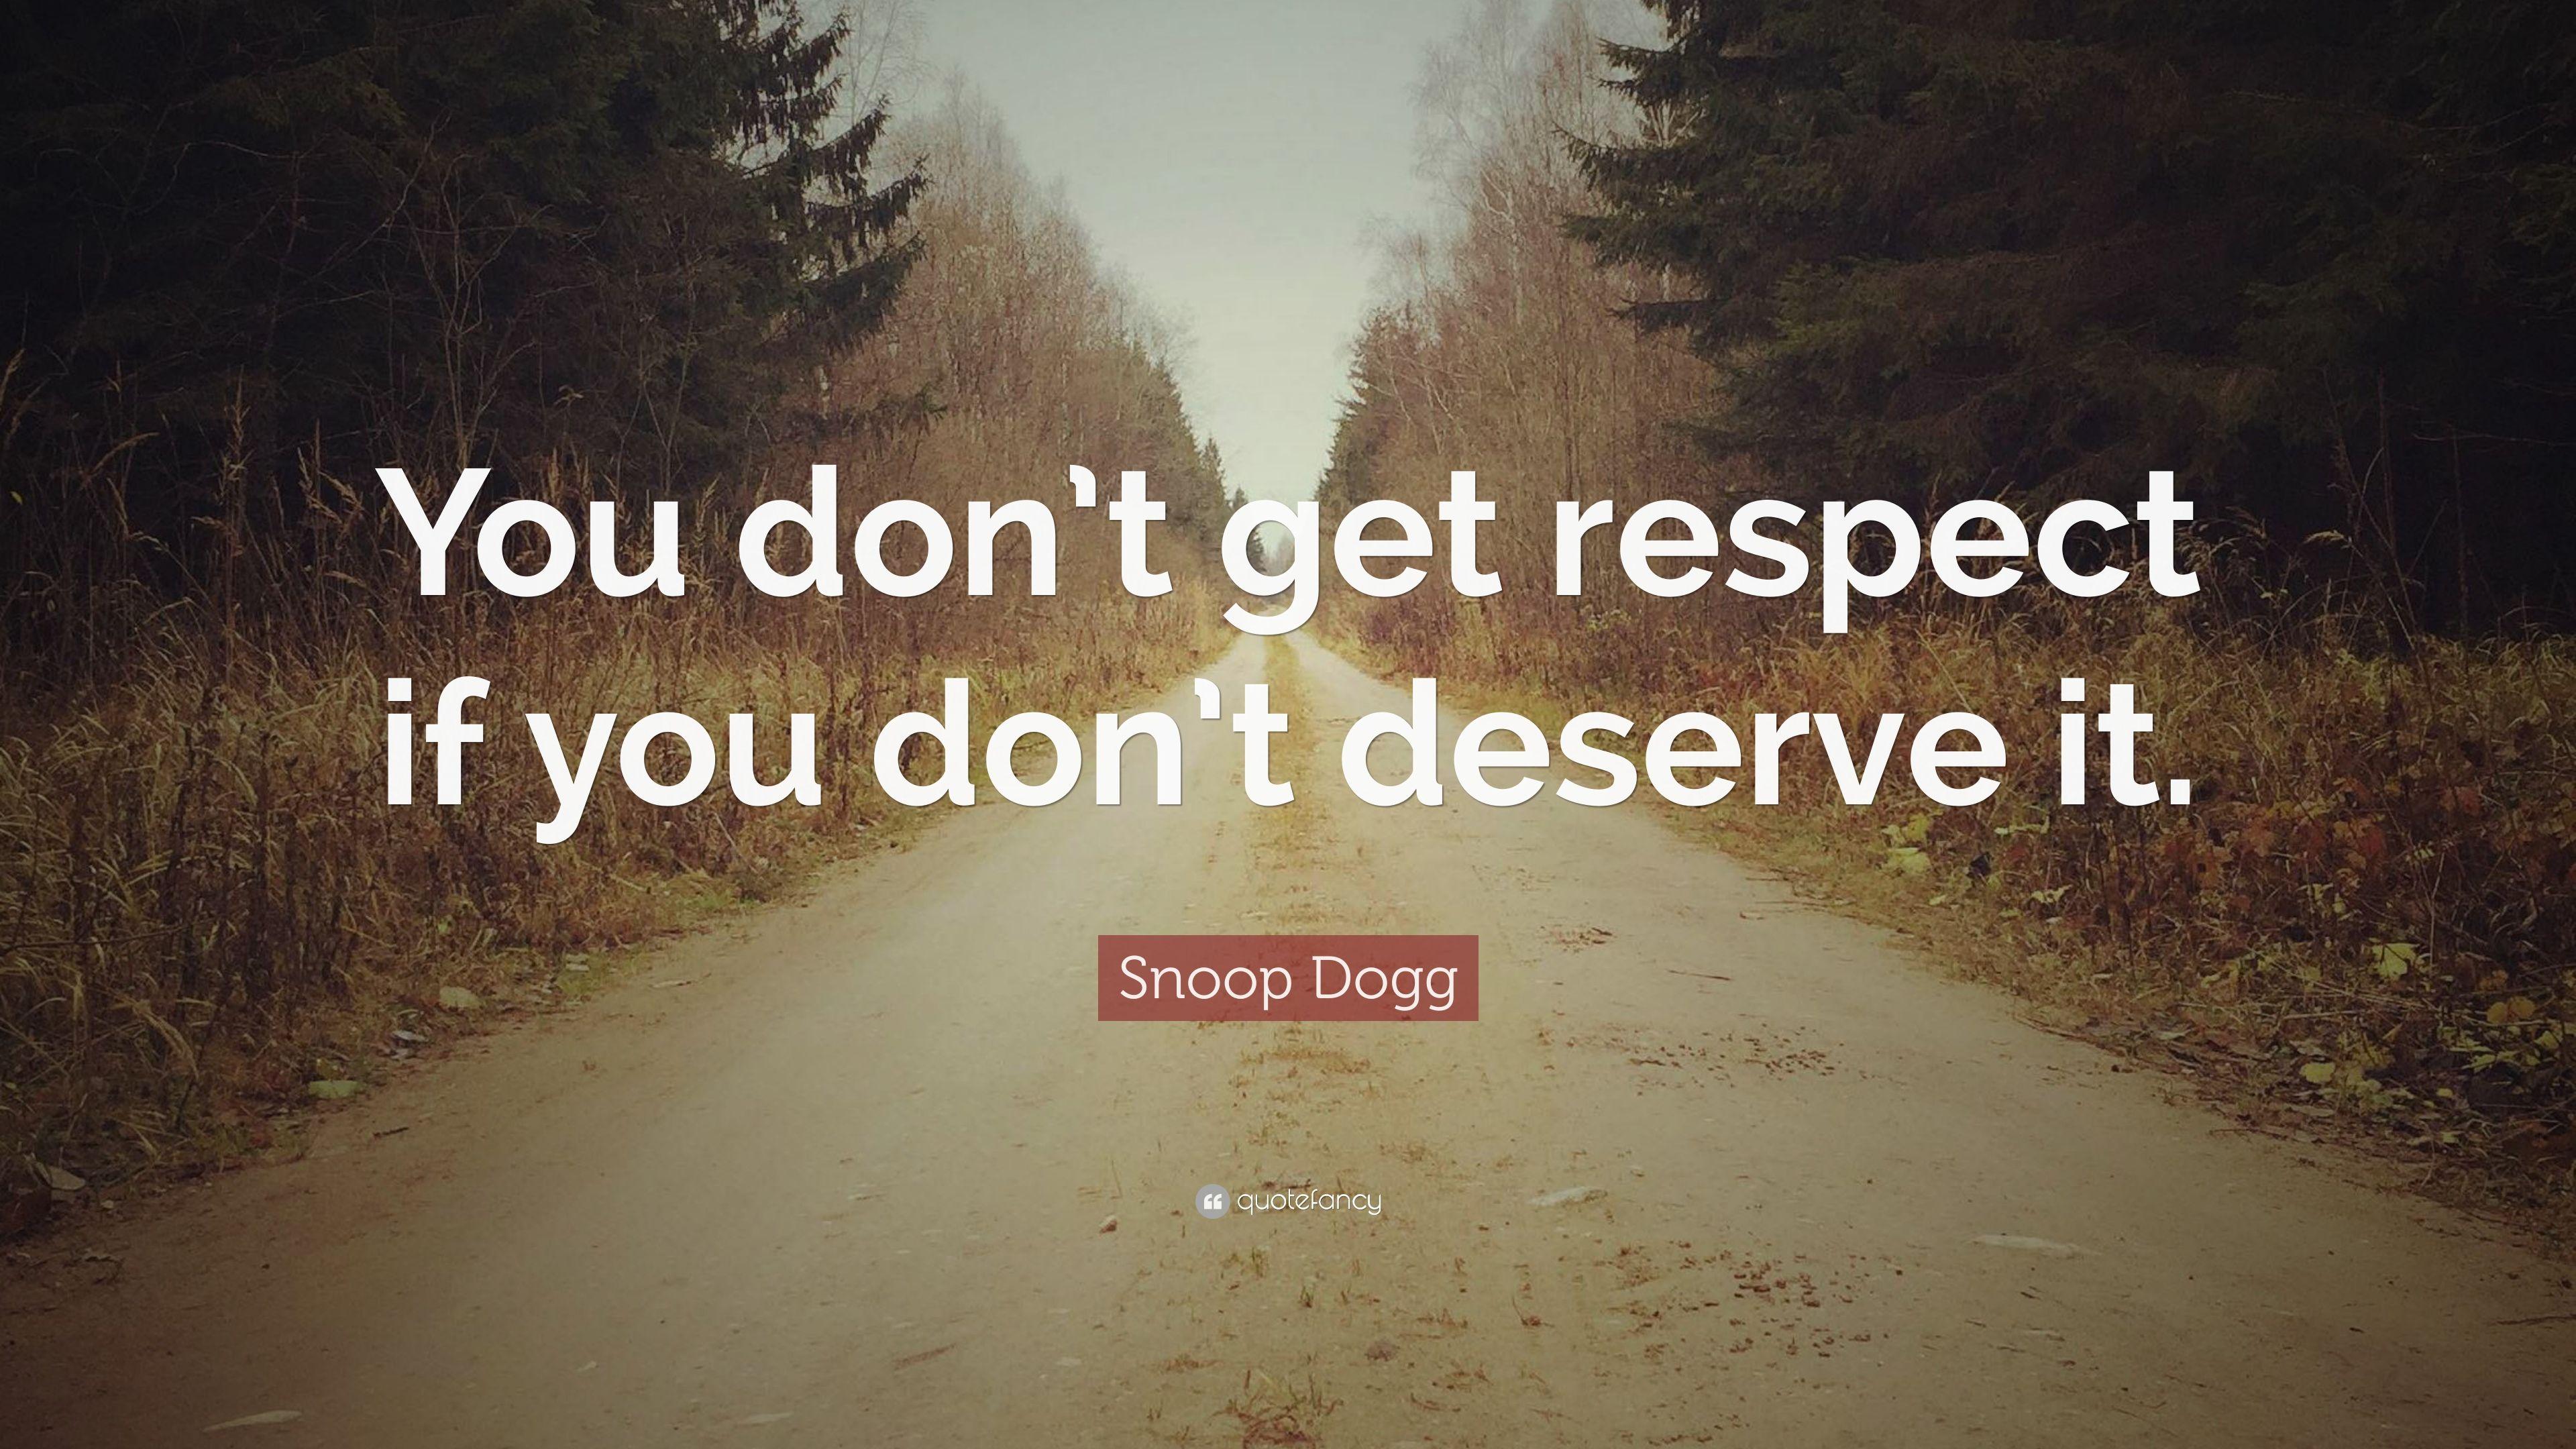 Snoop Dogg Quote: “You don't get respect if you don't deserve it